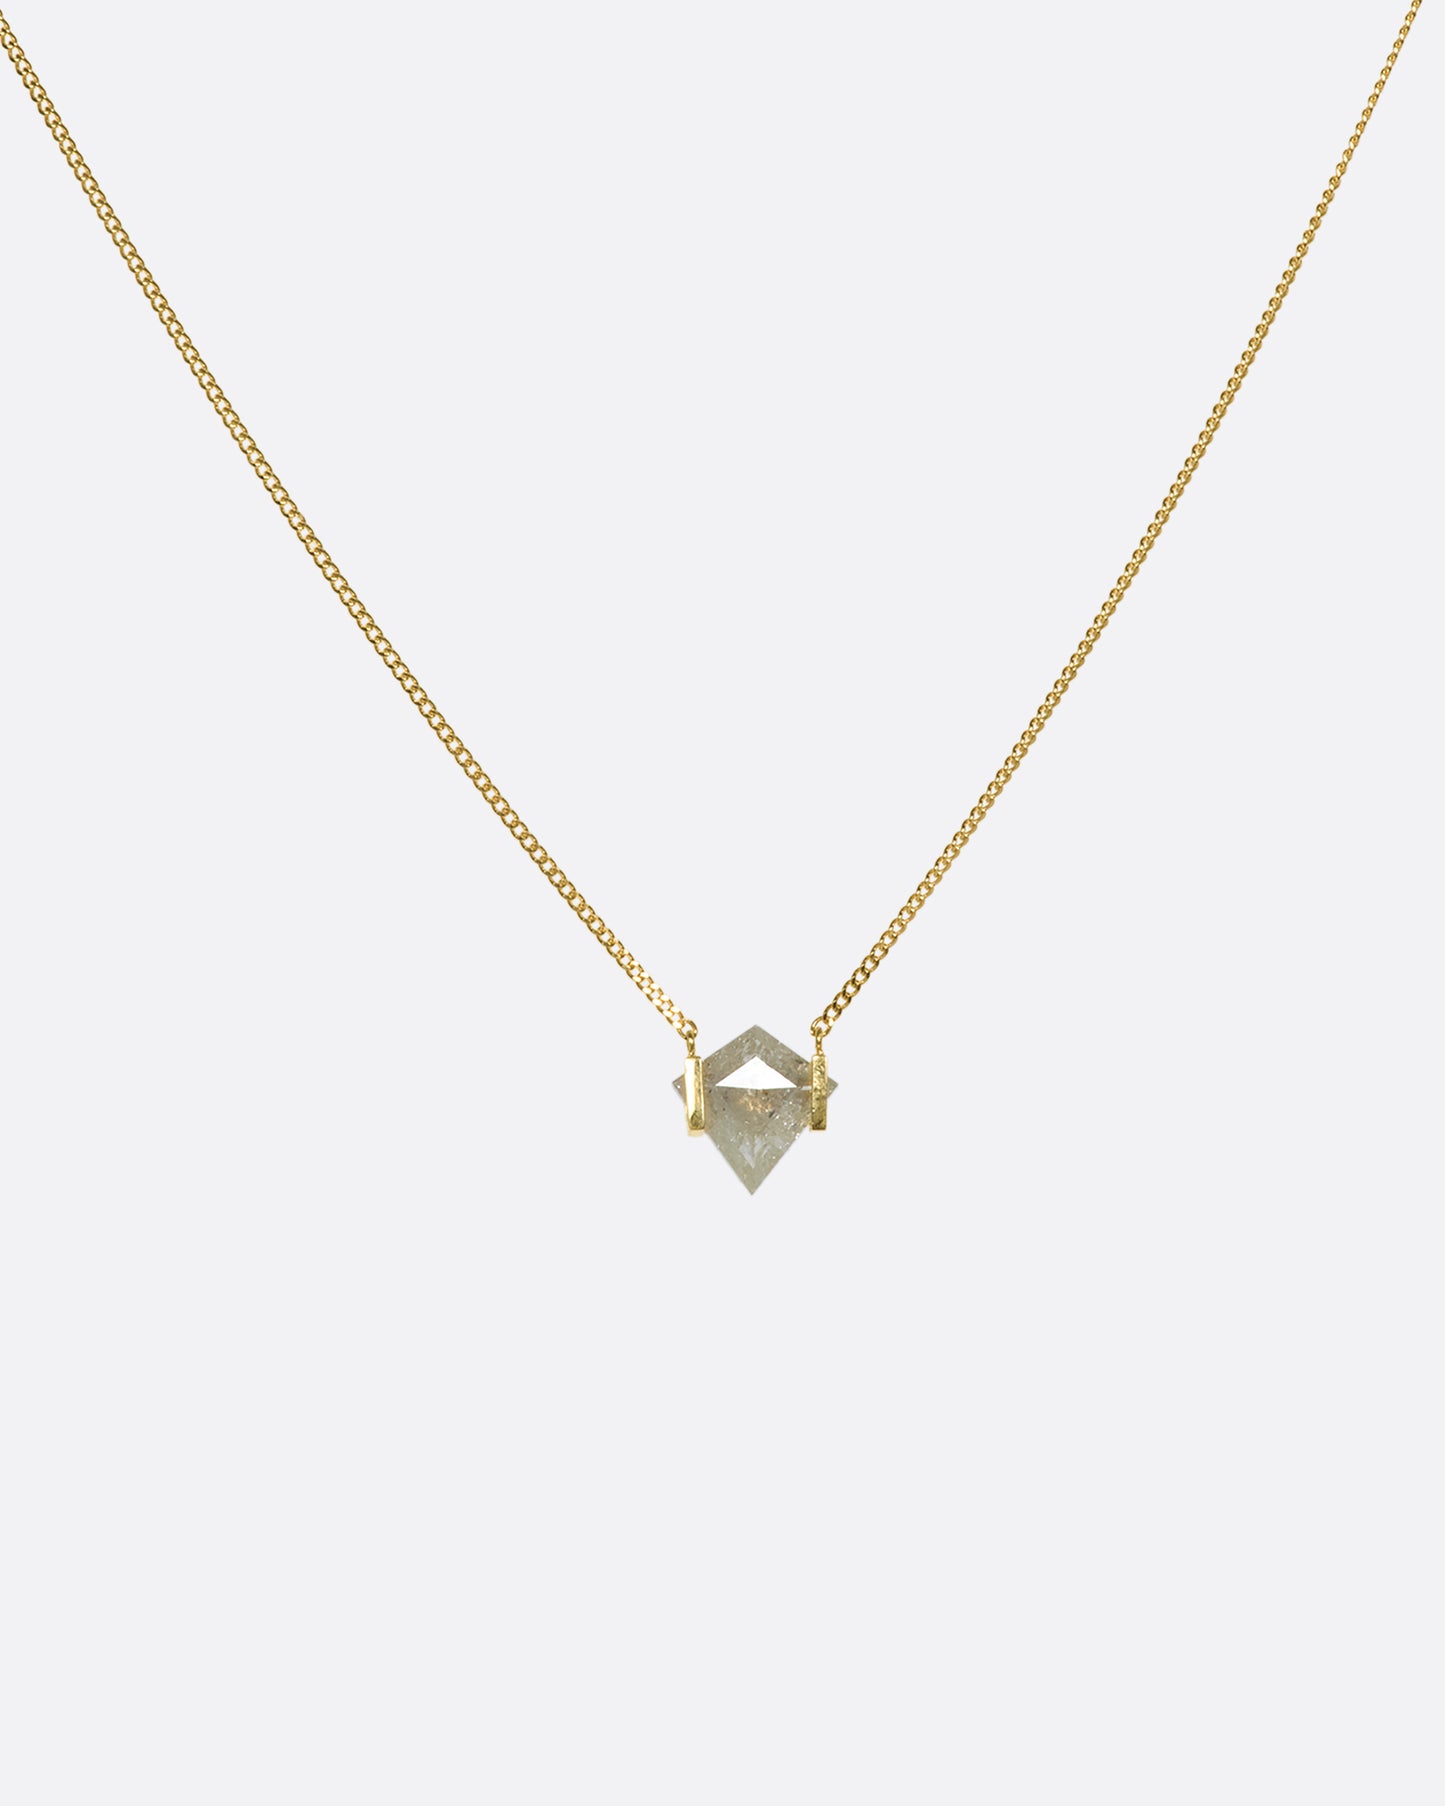 A shield-shaped icy gray diamond suspended between two 18k gold squares